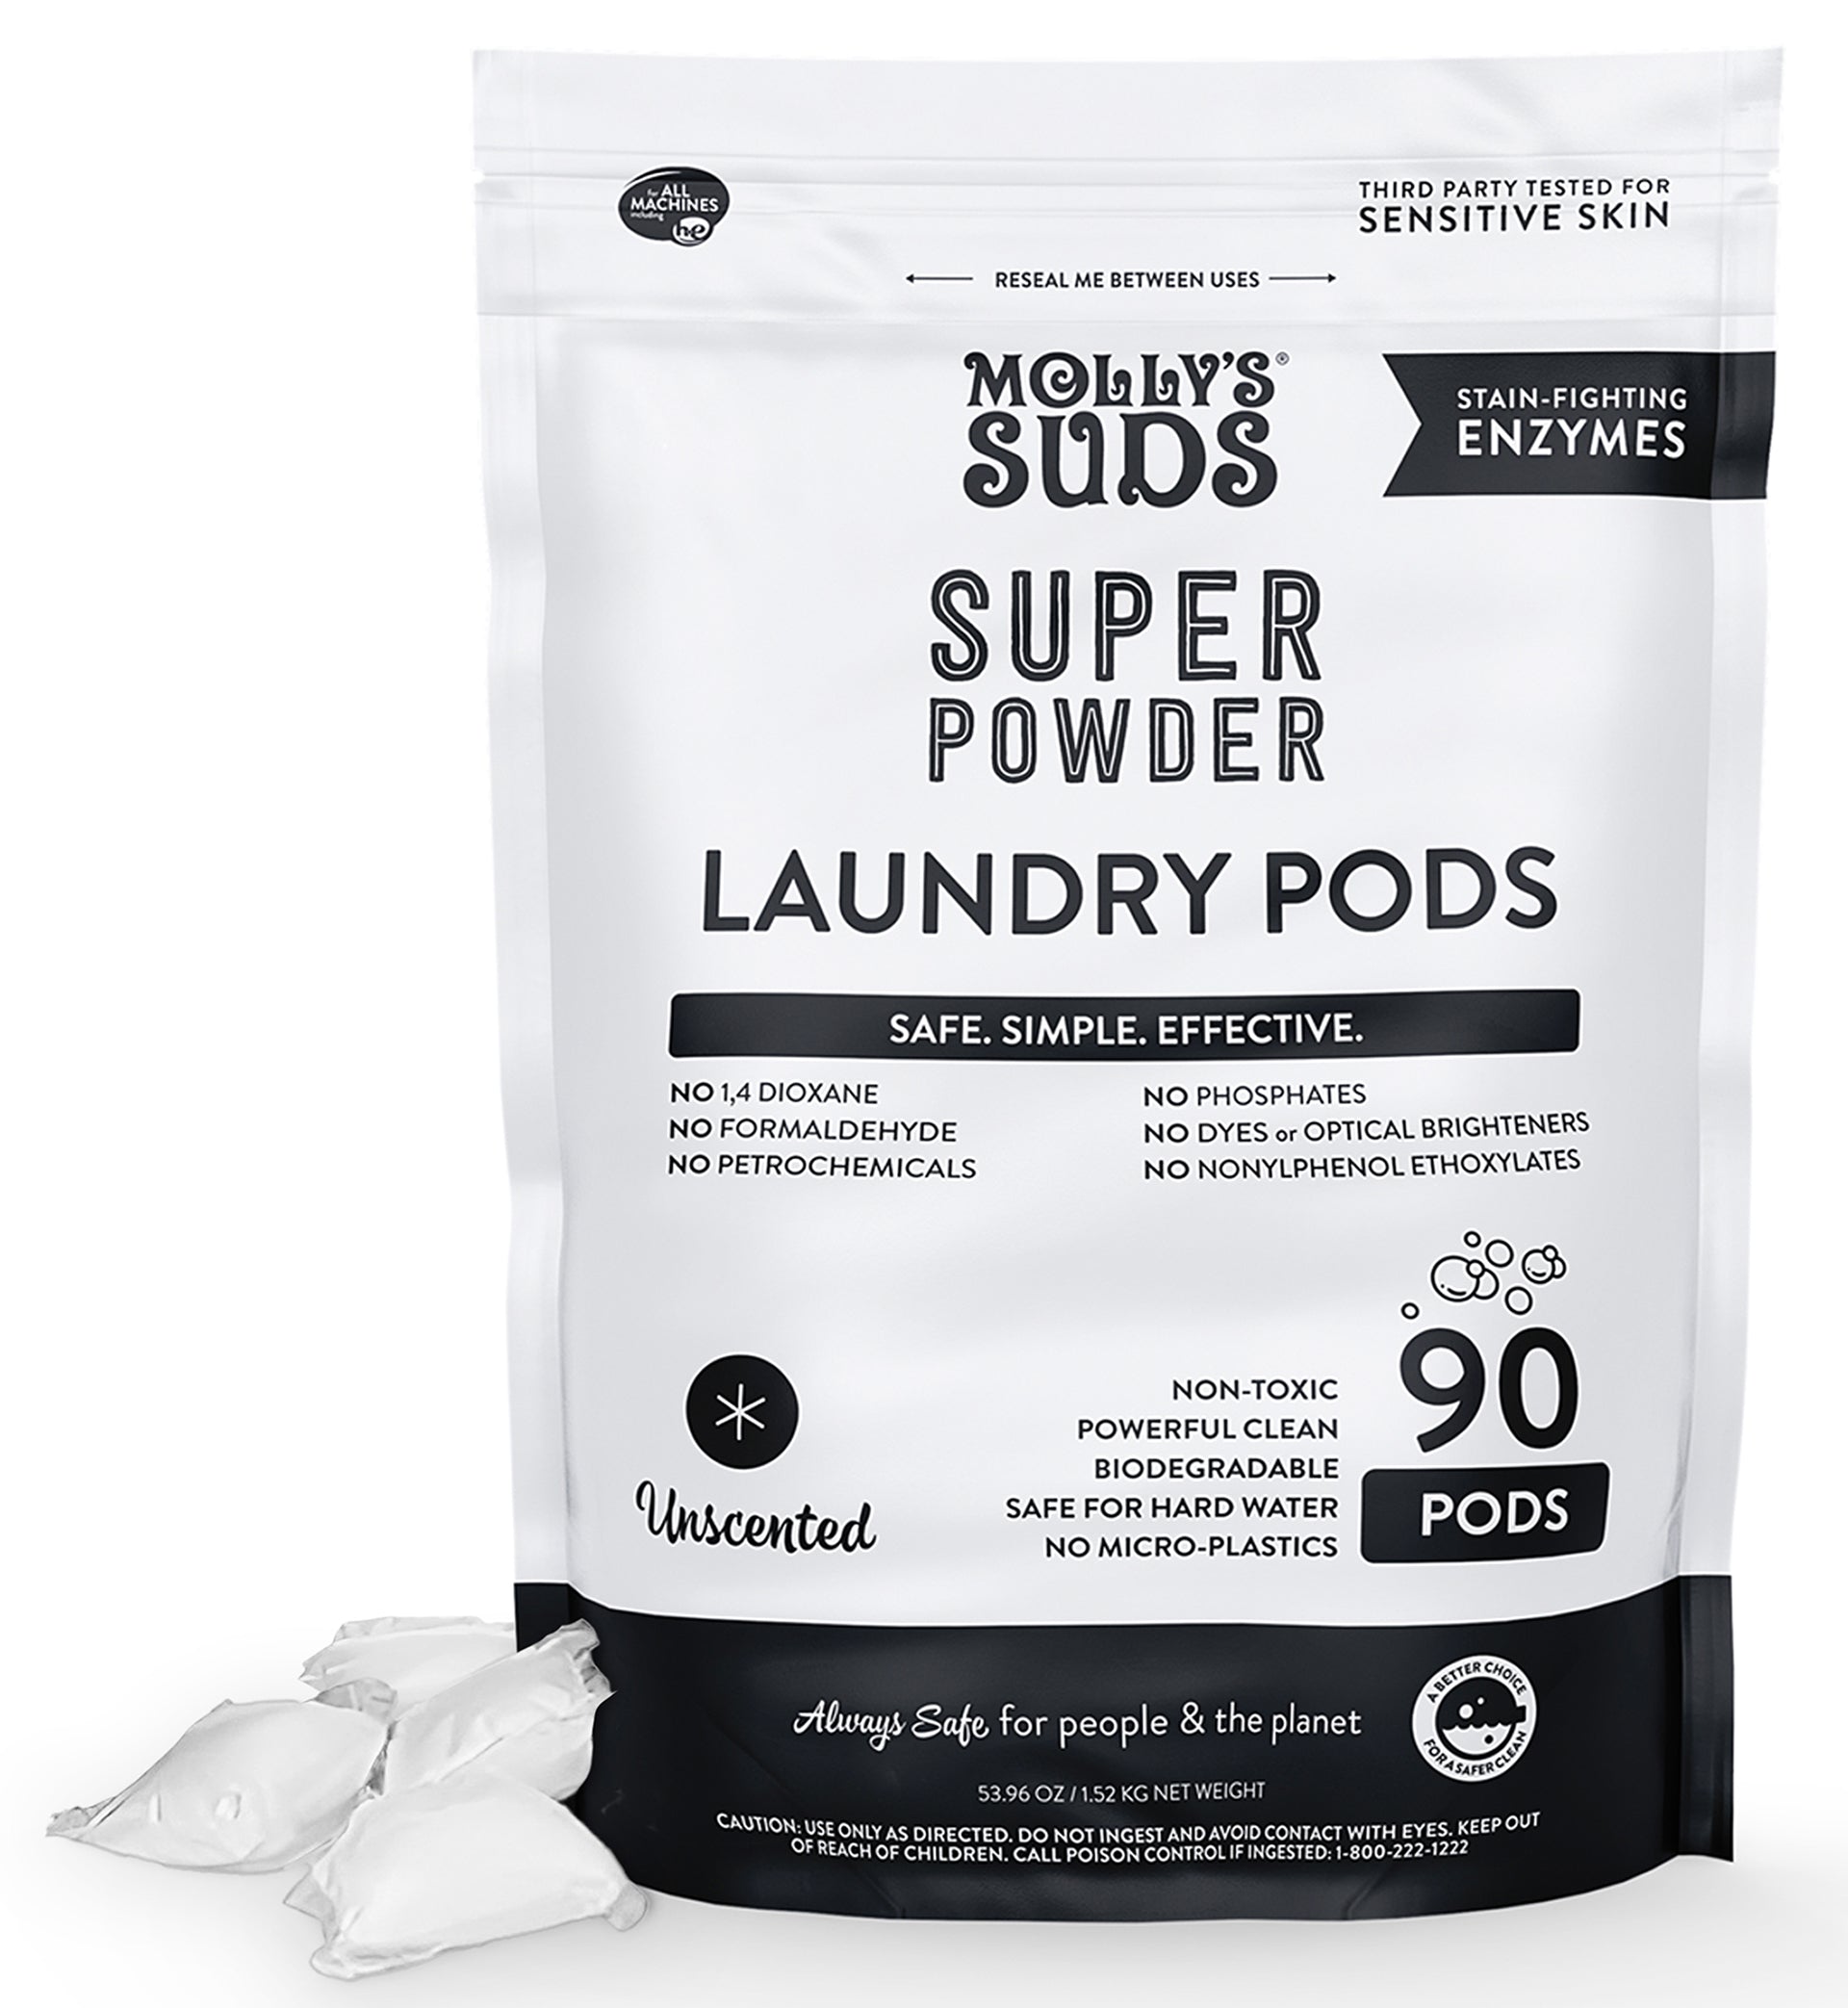 Molly's Suds Natural Laundry Powder